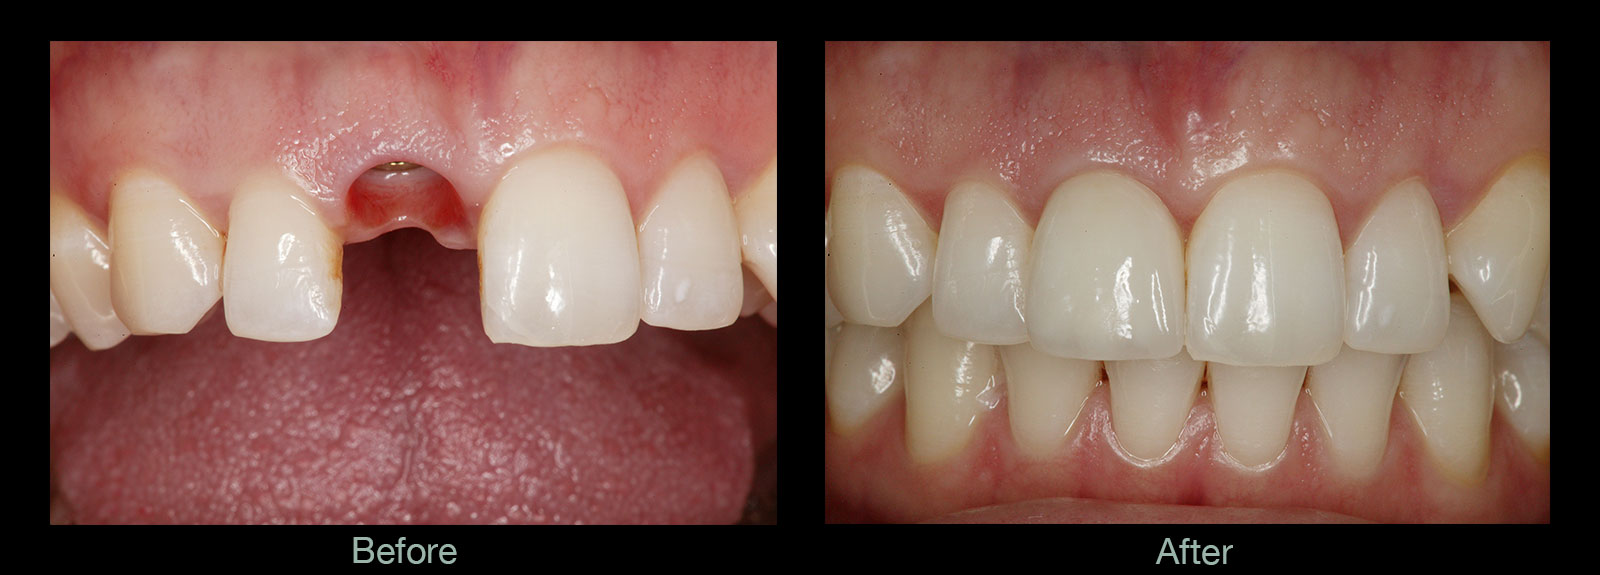 Implant-before-and-after